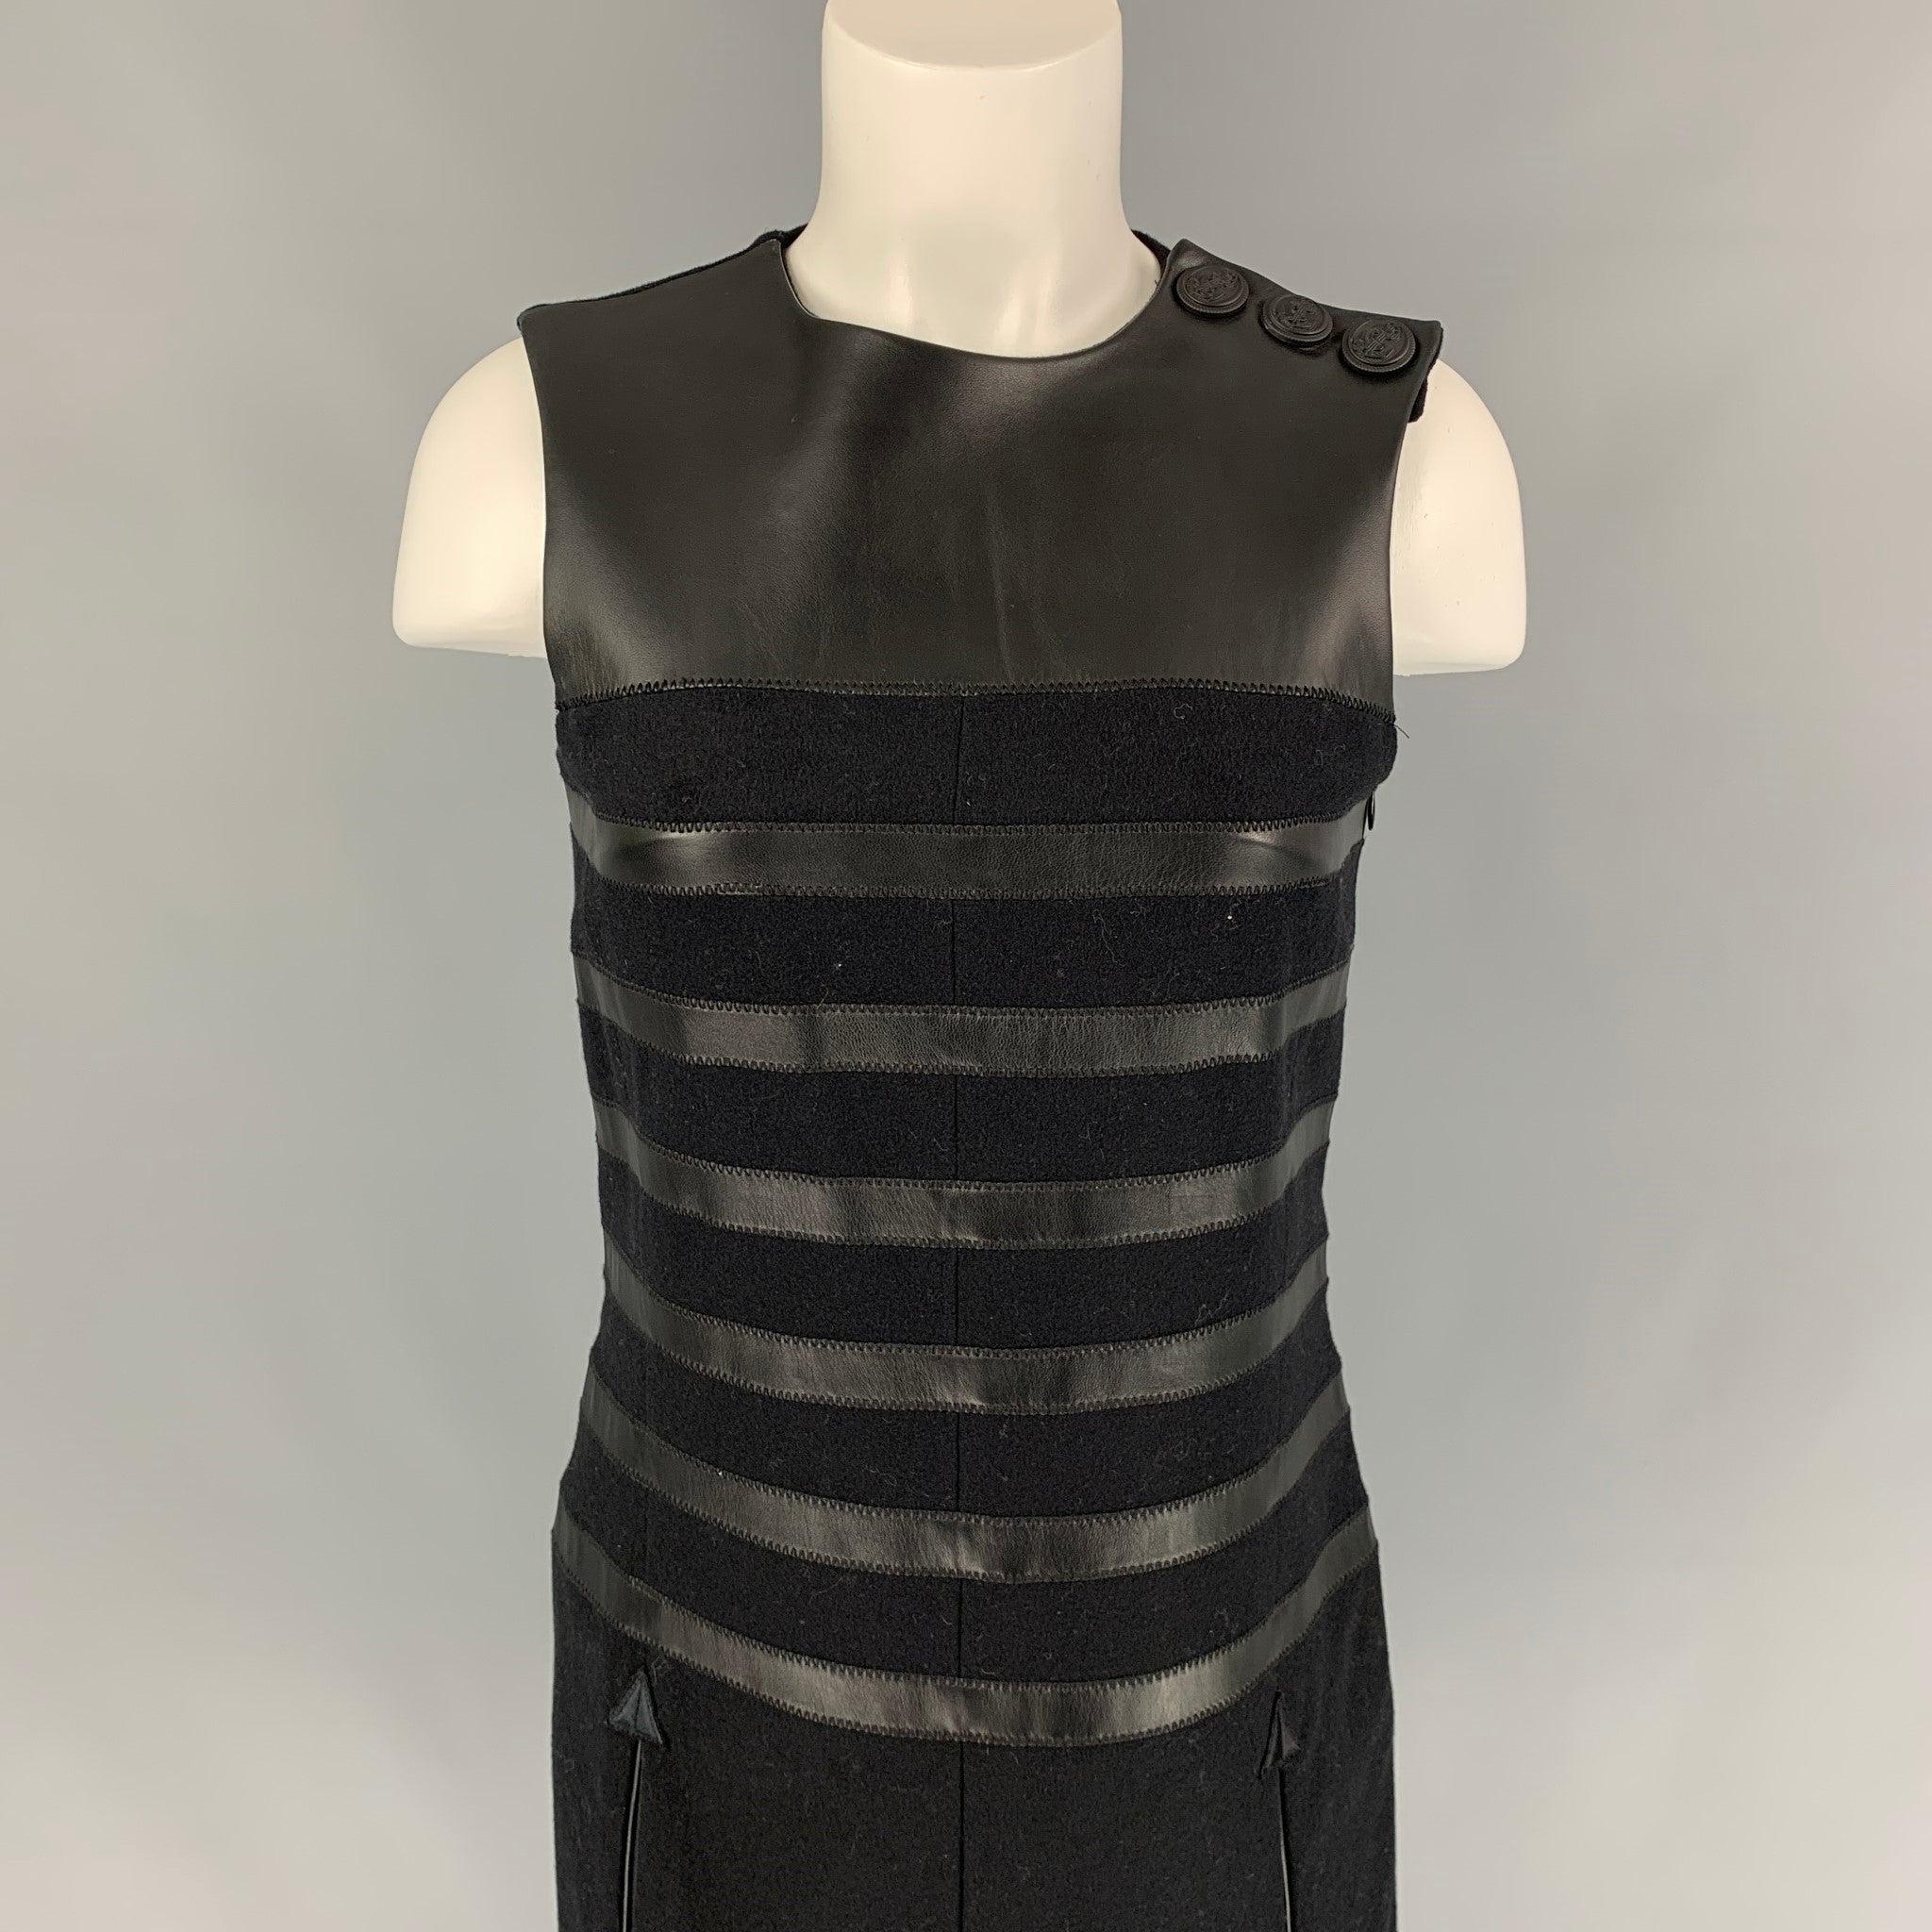 JEAN PAUL GAULTIER dress comes in a black wool blend with leather trim detail featuring shift style, slit pockets, front slit, back slit, three shoulder buttons, and a side zipper closure. Made in Italy.
Very Good
Pre-Owned Condition. 

Marked:   I